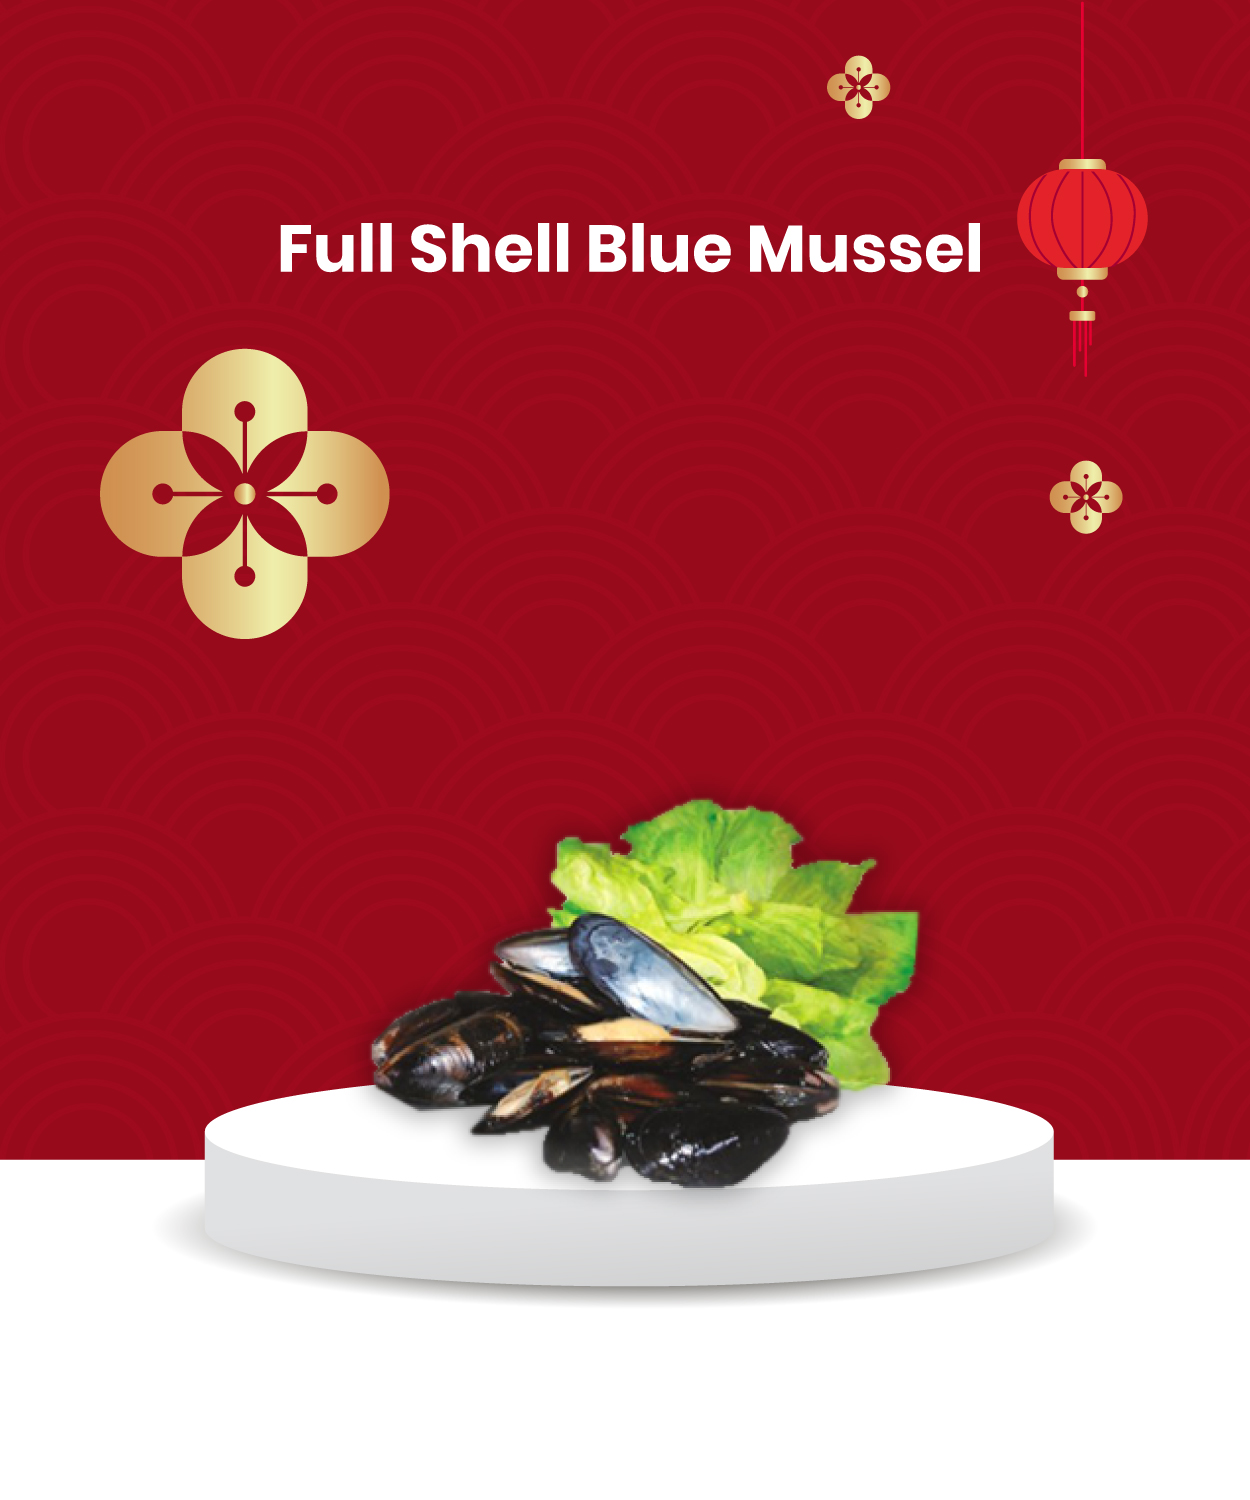 Dropee-cny-bestseller-campaign-item-7-mussels